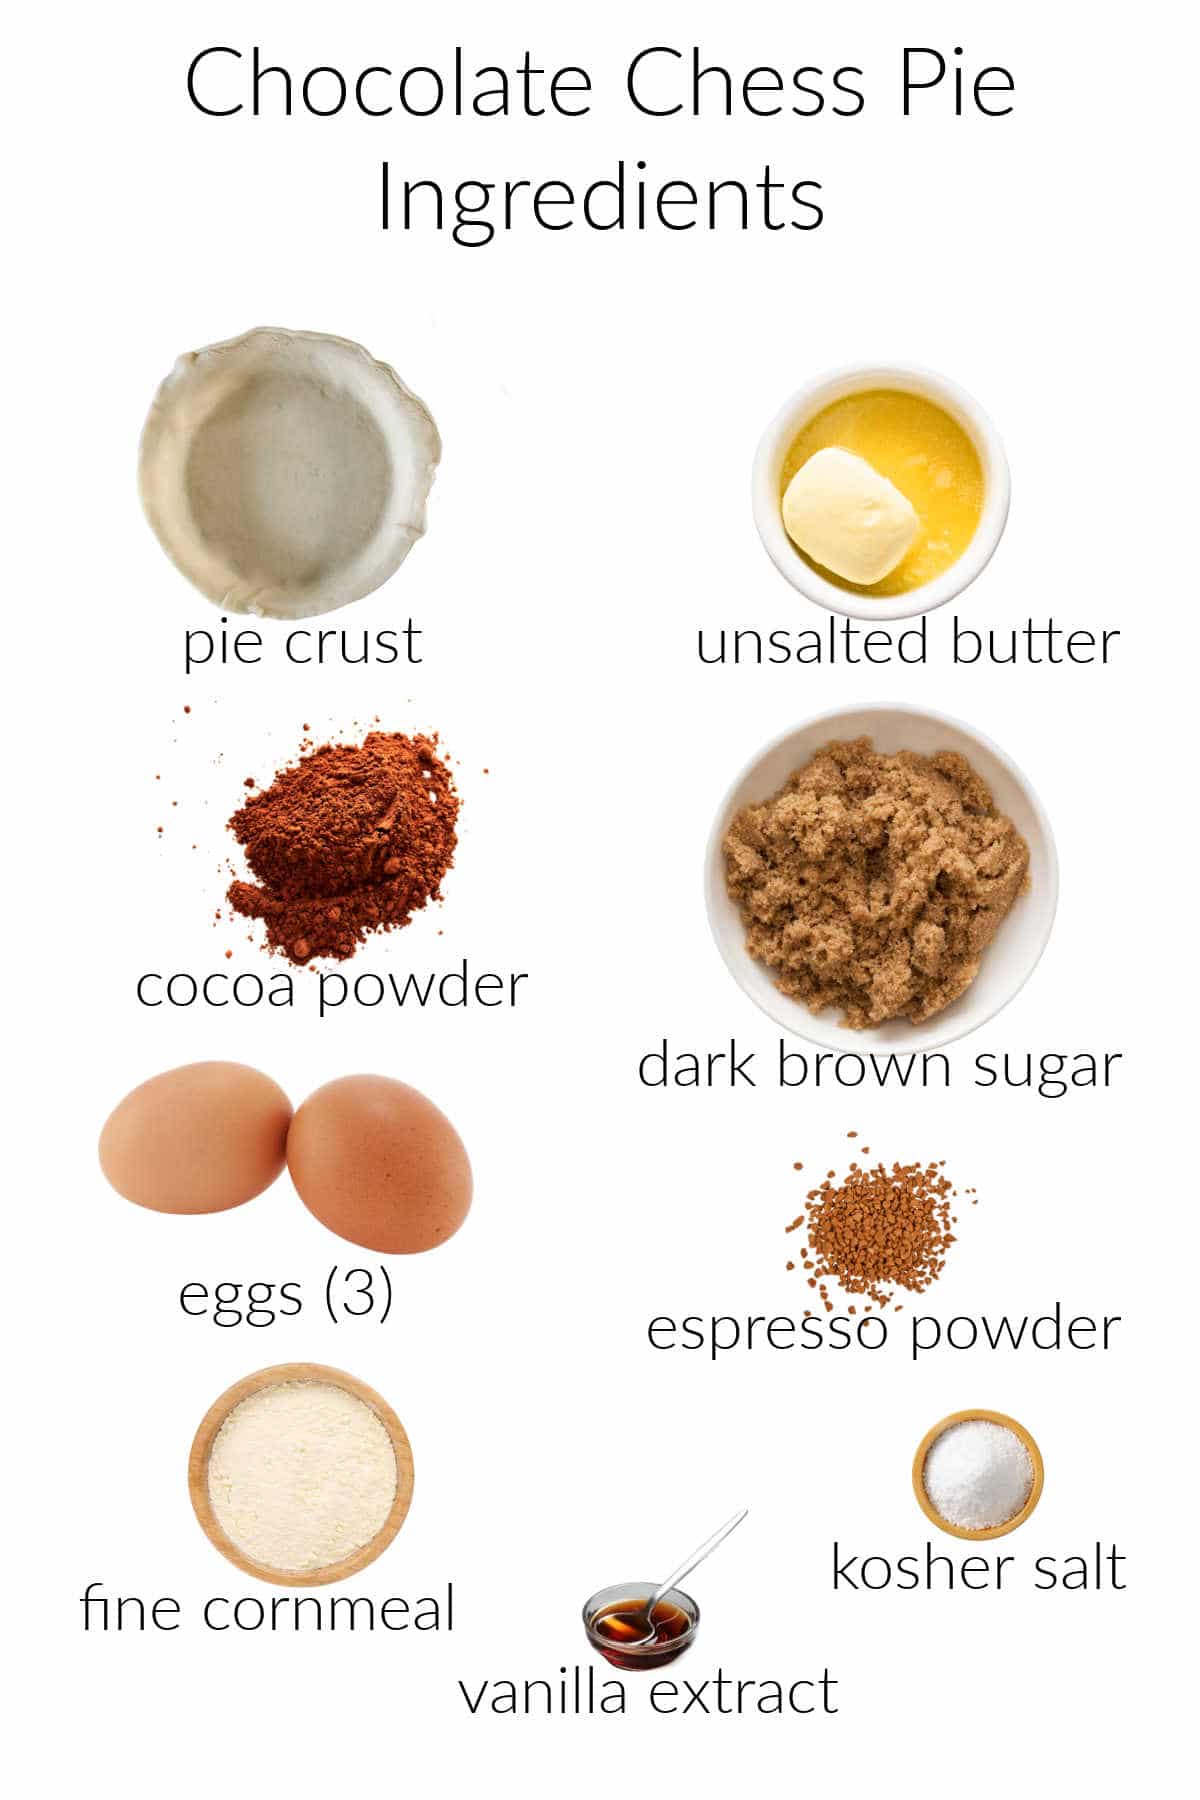 Collage of ingredients in chocolate chess pie.